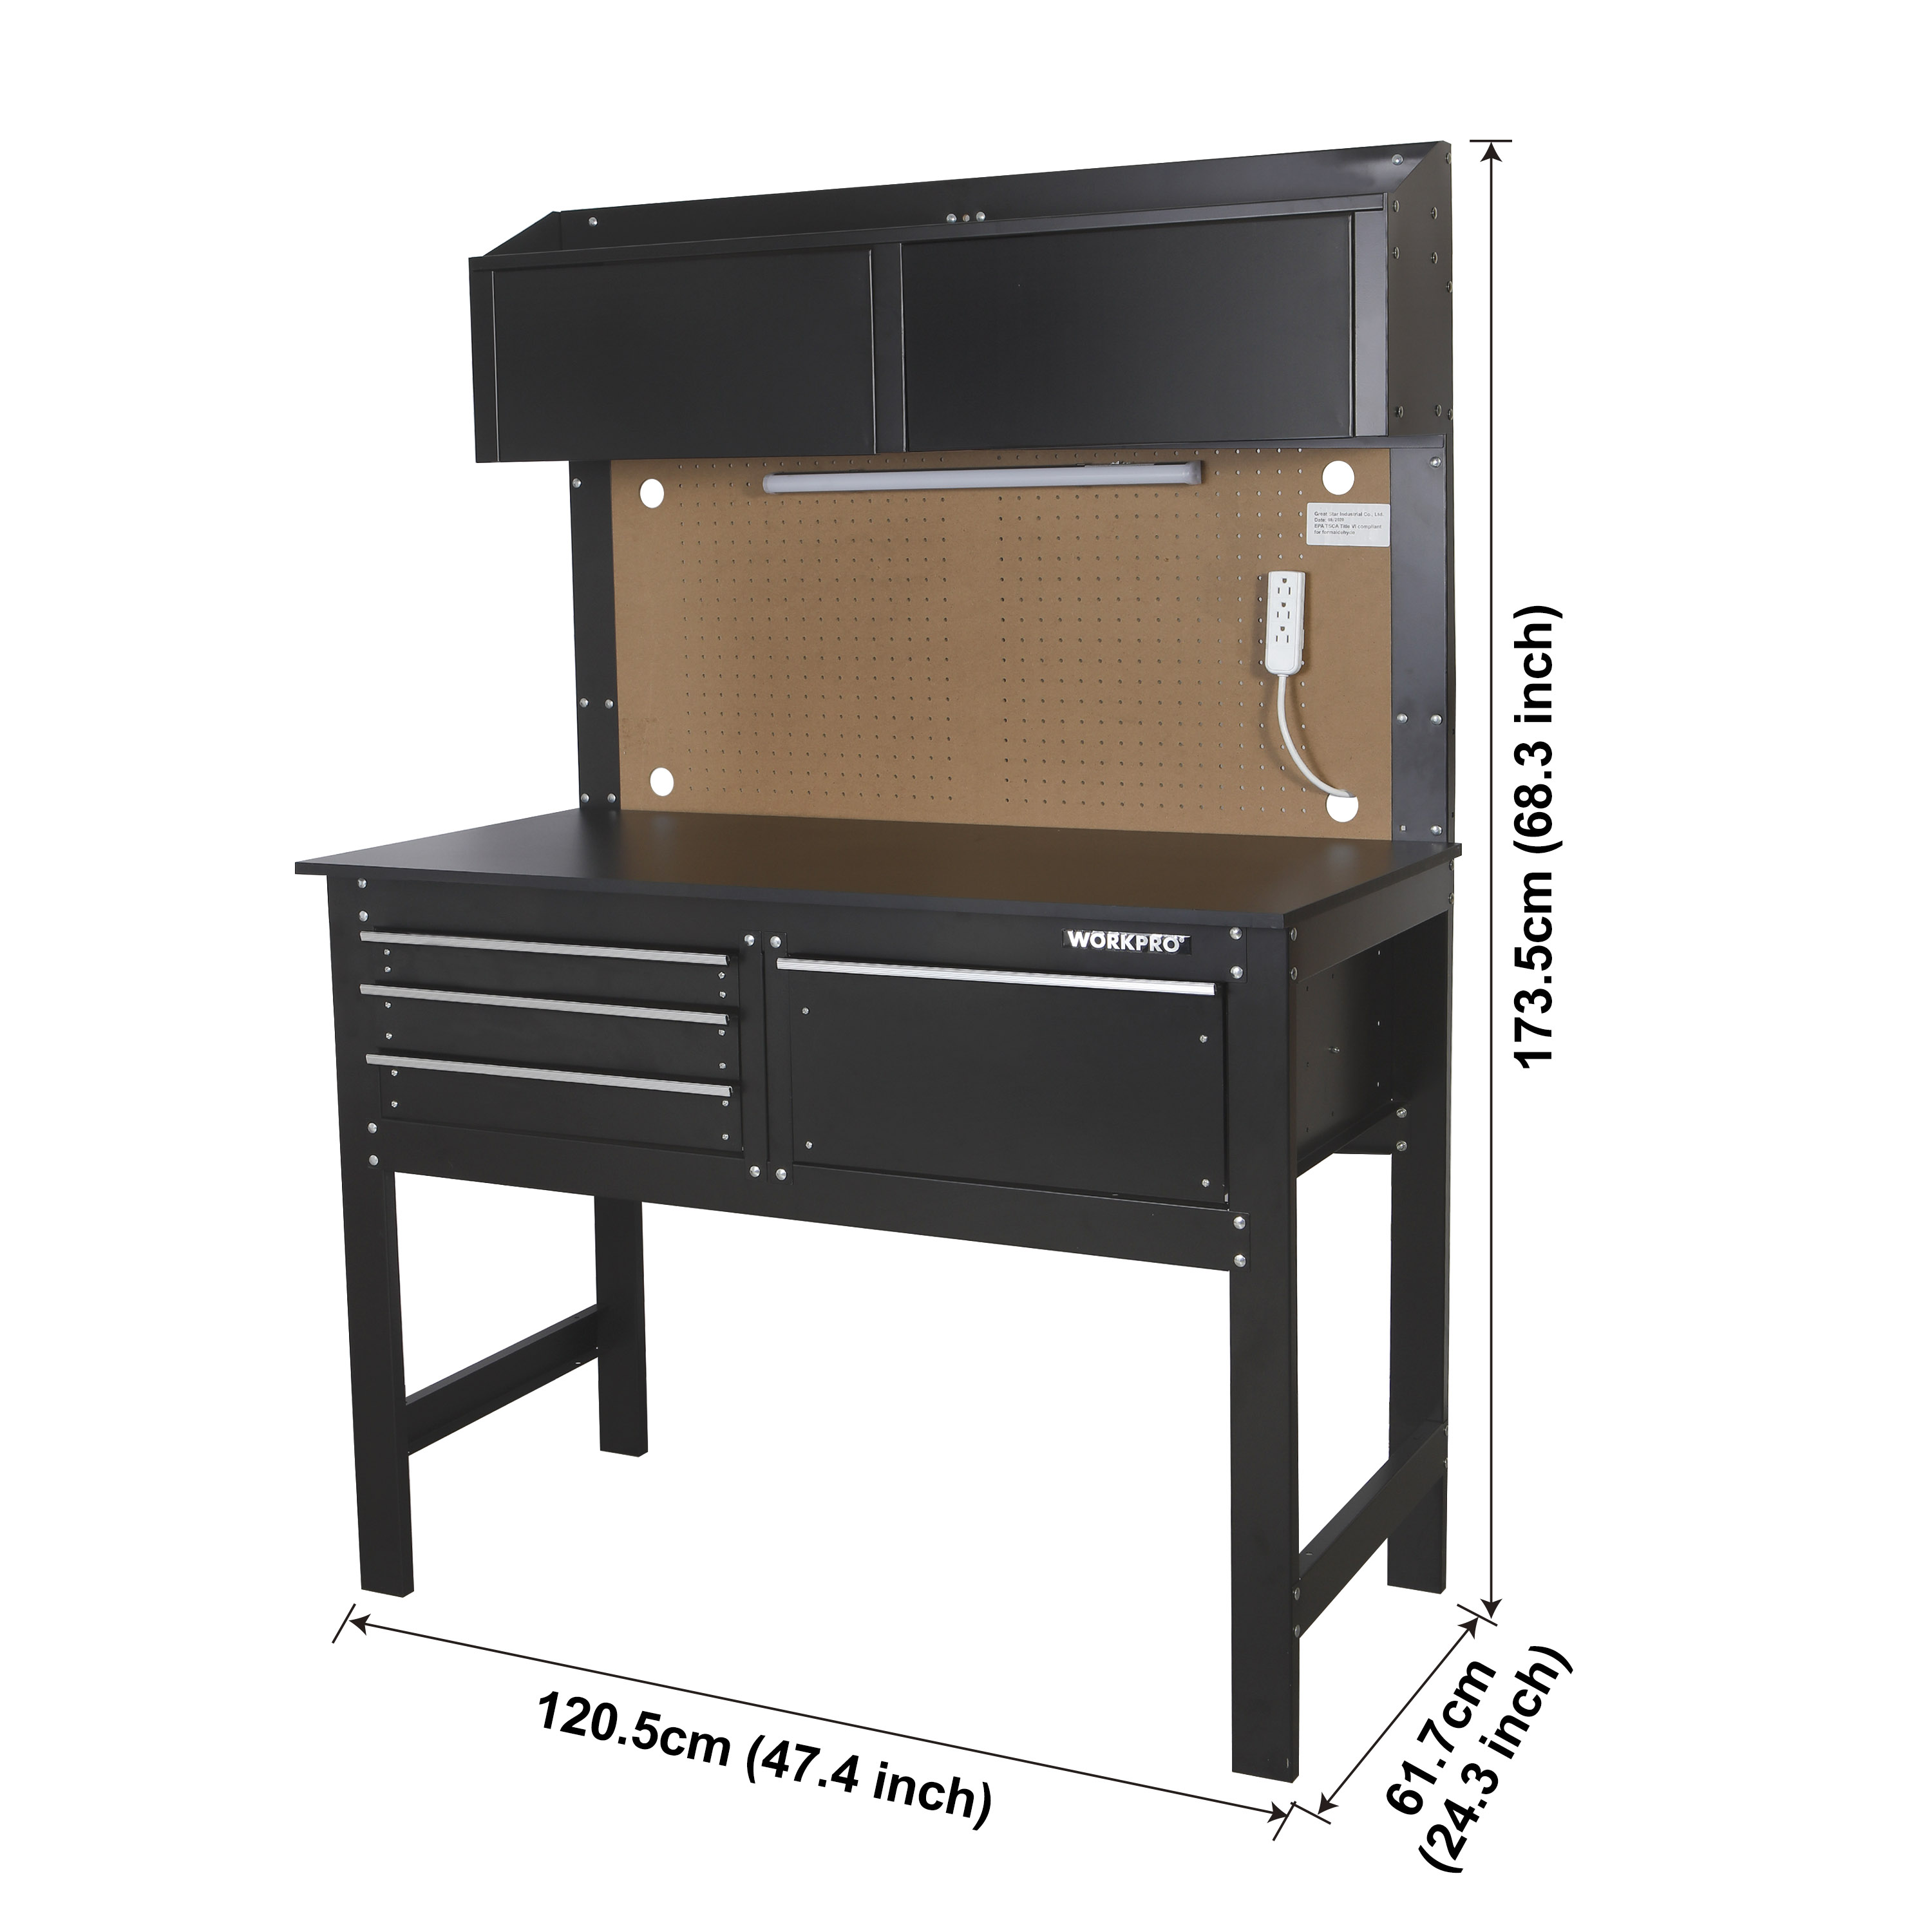 WORKPRO 2-in-1 48-inch Workbench and Cabinet Combo with Light, Steel, Wood - image 3 of 9